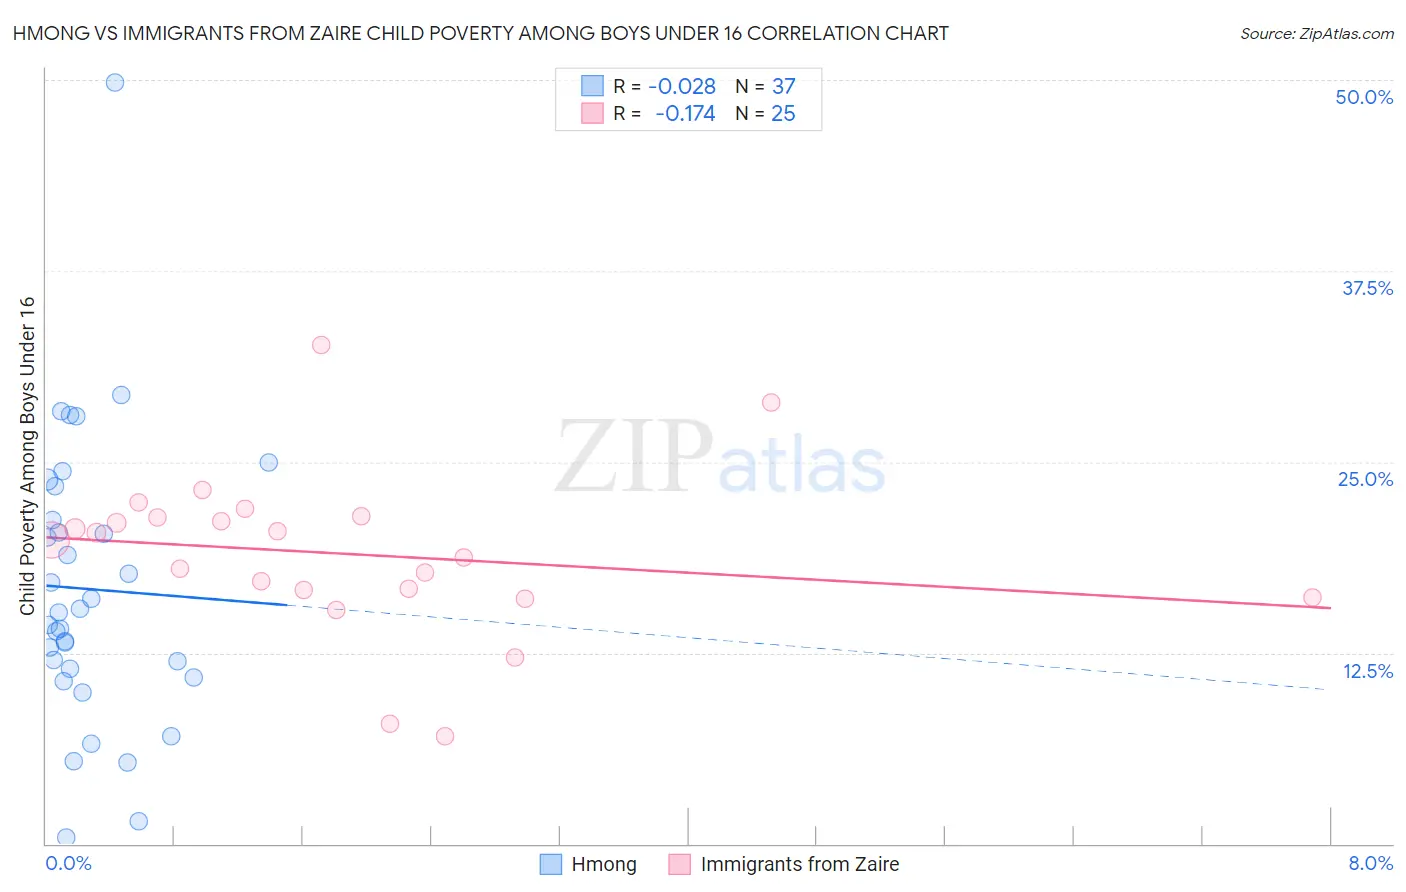 Hmong vs Immigrants from Zaire Child Poverty Among Boys Under 16